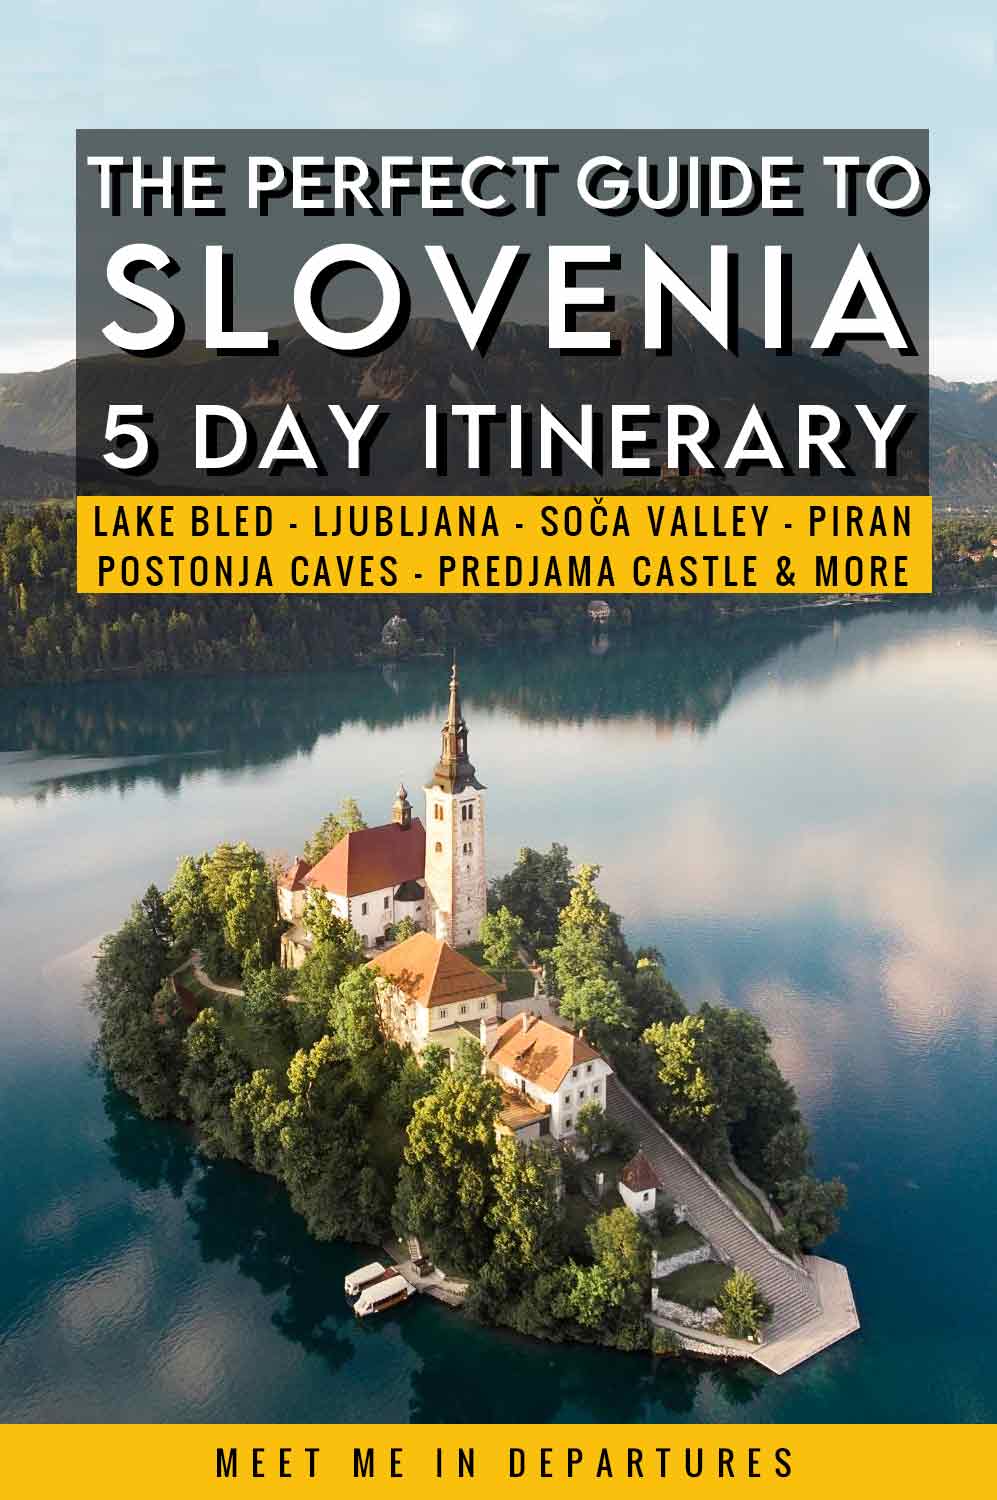 The Best Guide To Slovenia in 5 Days – Your Complete 5 Days in Slovenia Itinerary 17